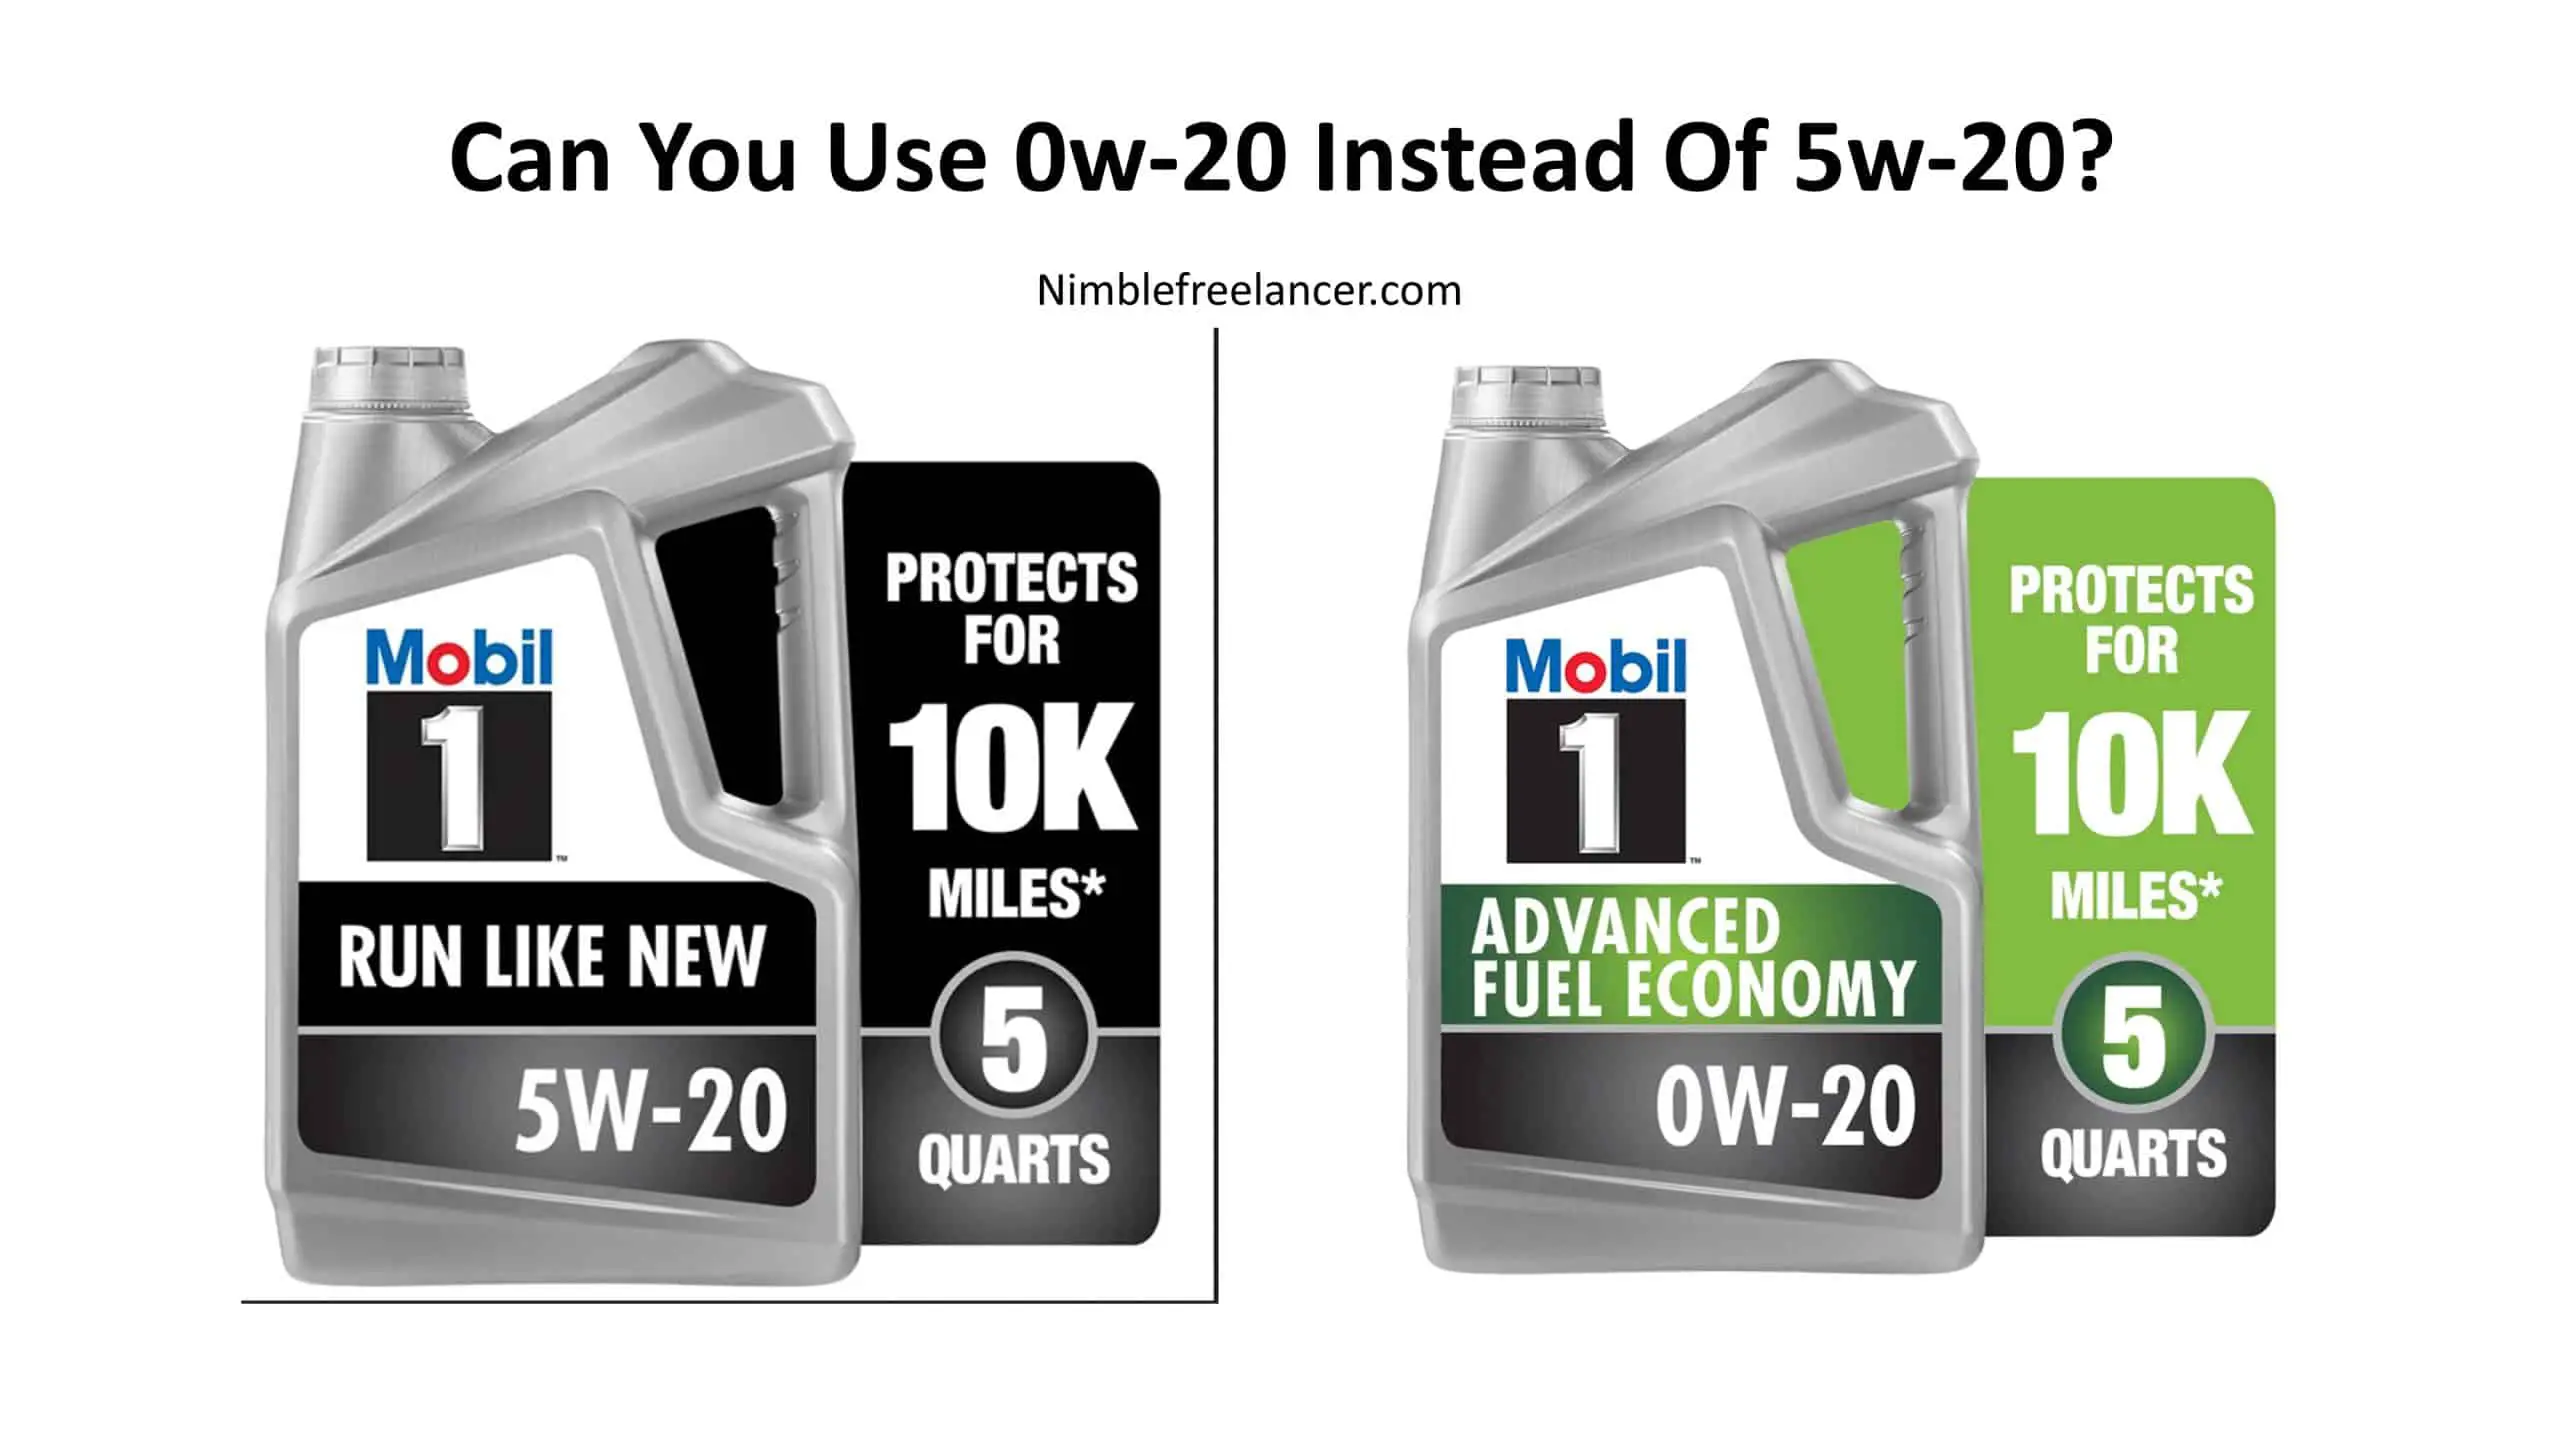 Can You Use 0w-20 Instead Of 5w-20